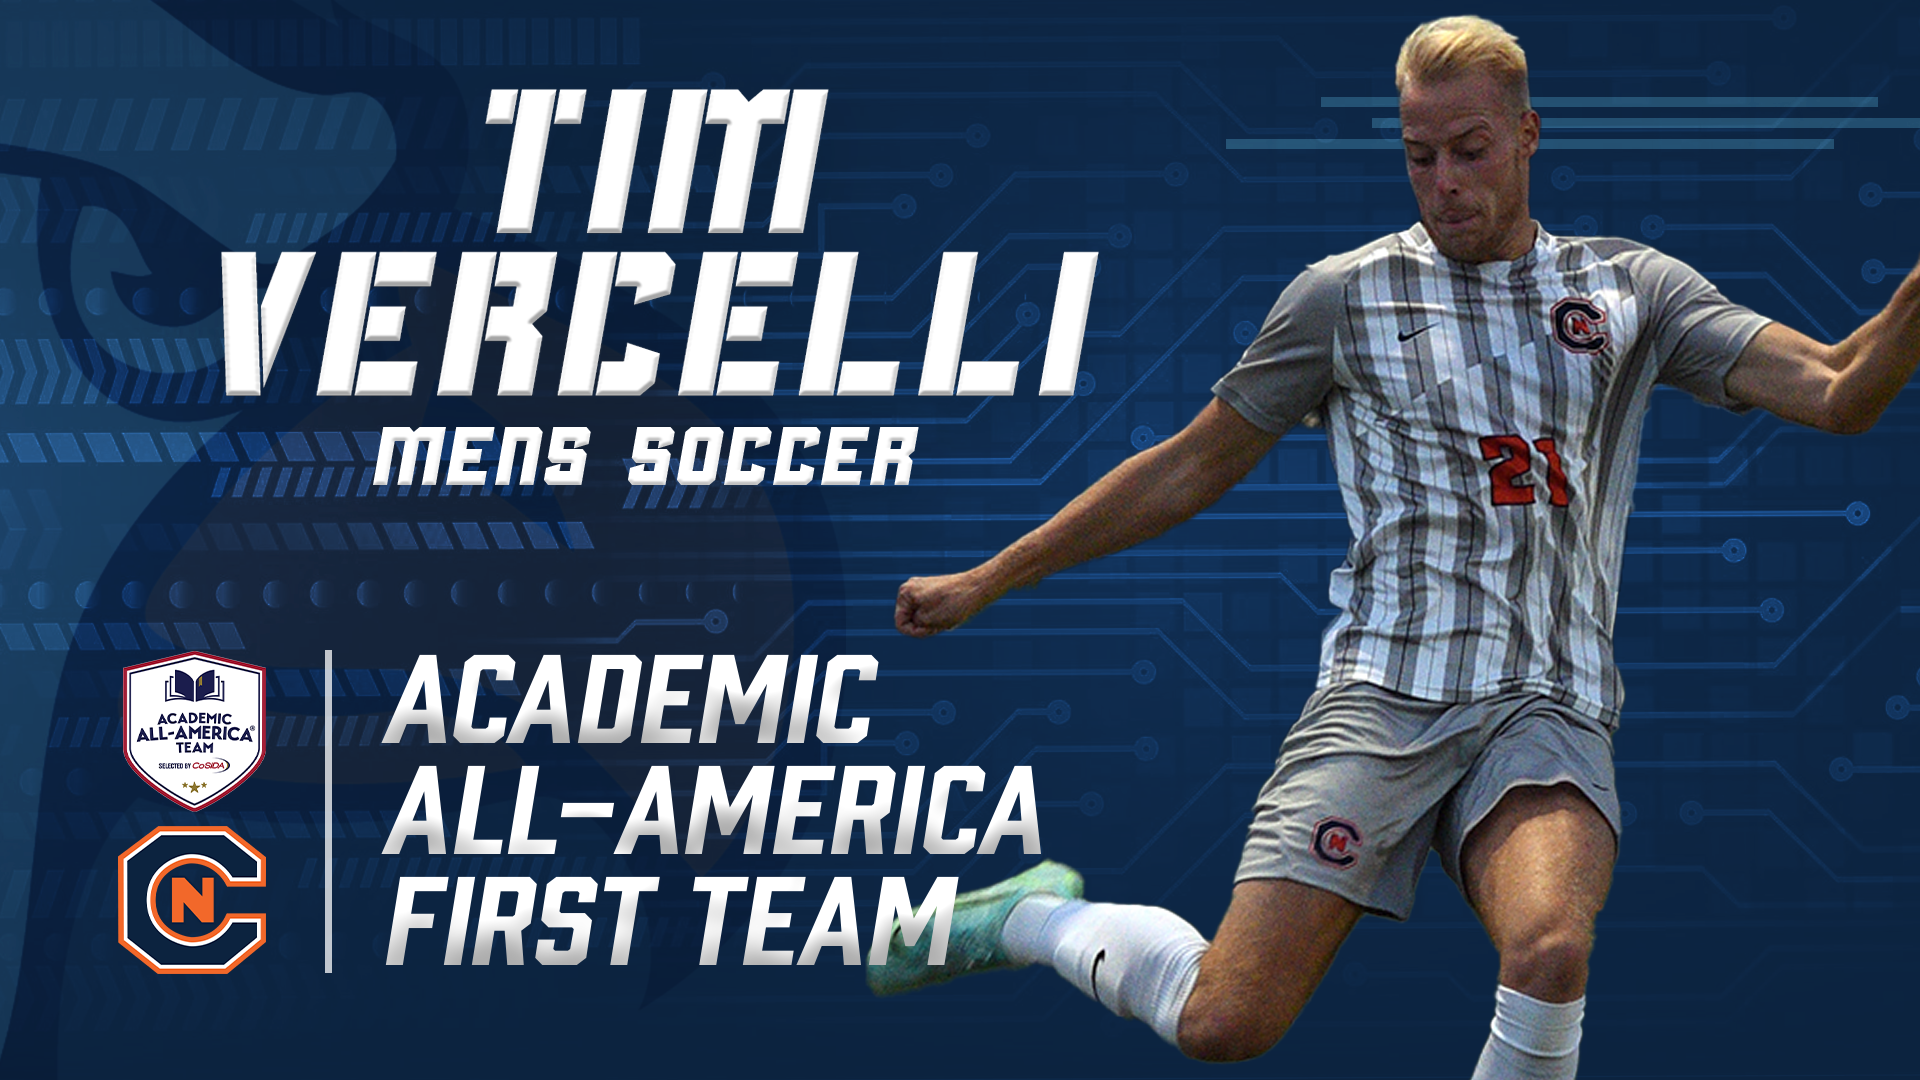 Buurman and Vercelli are Academic All-Americans